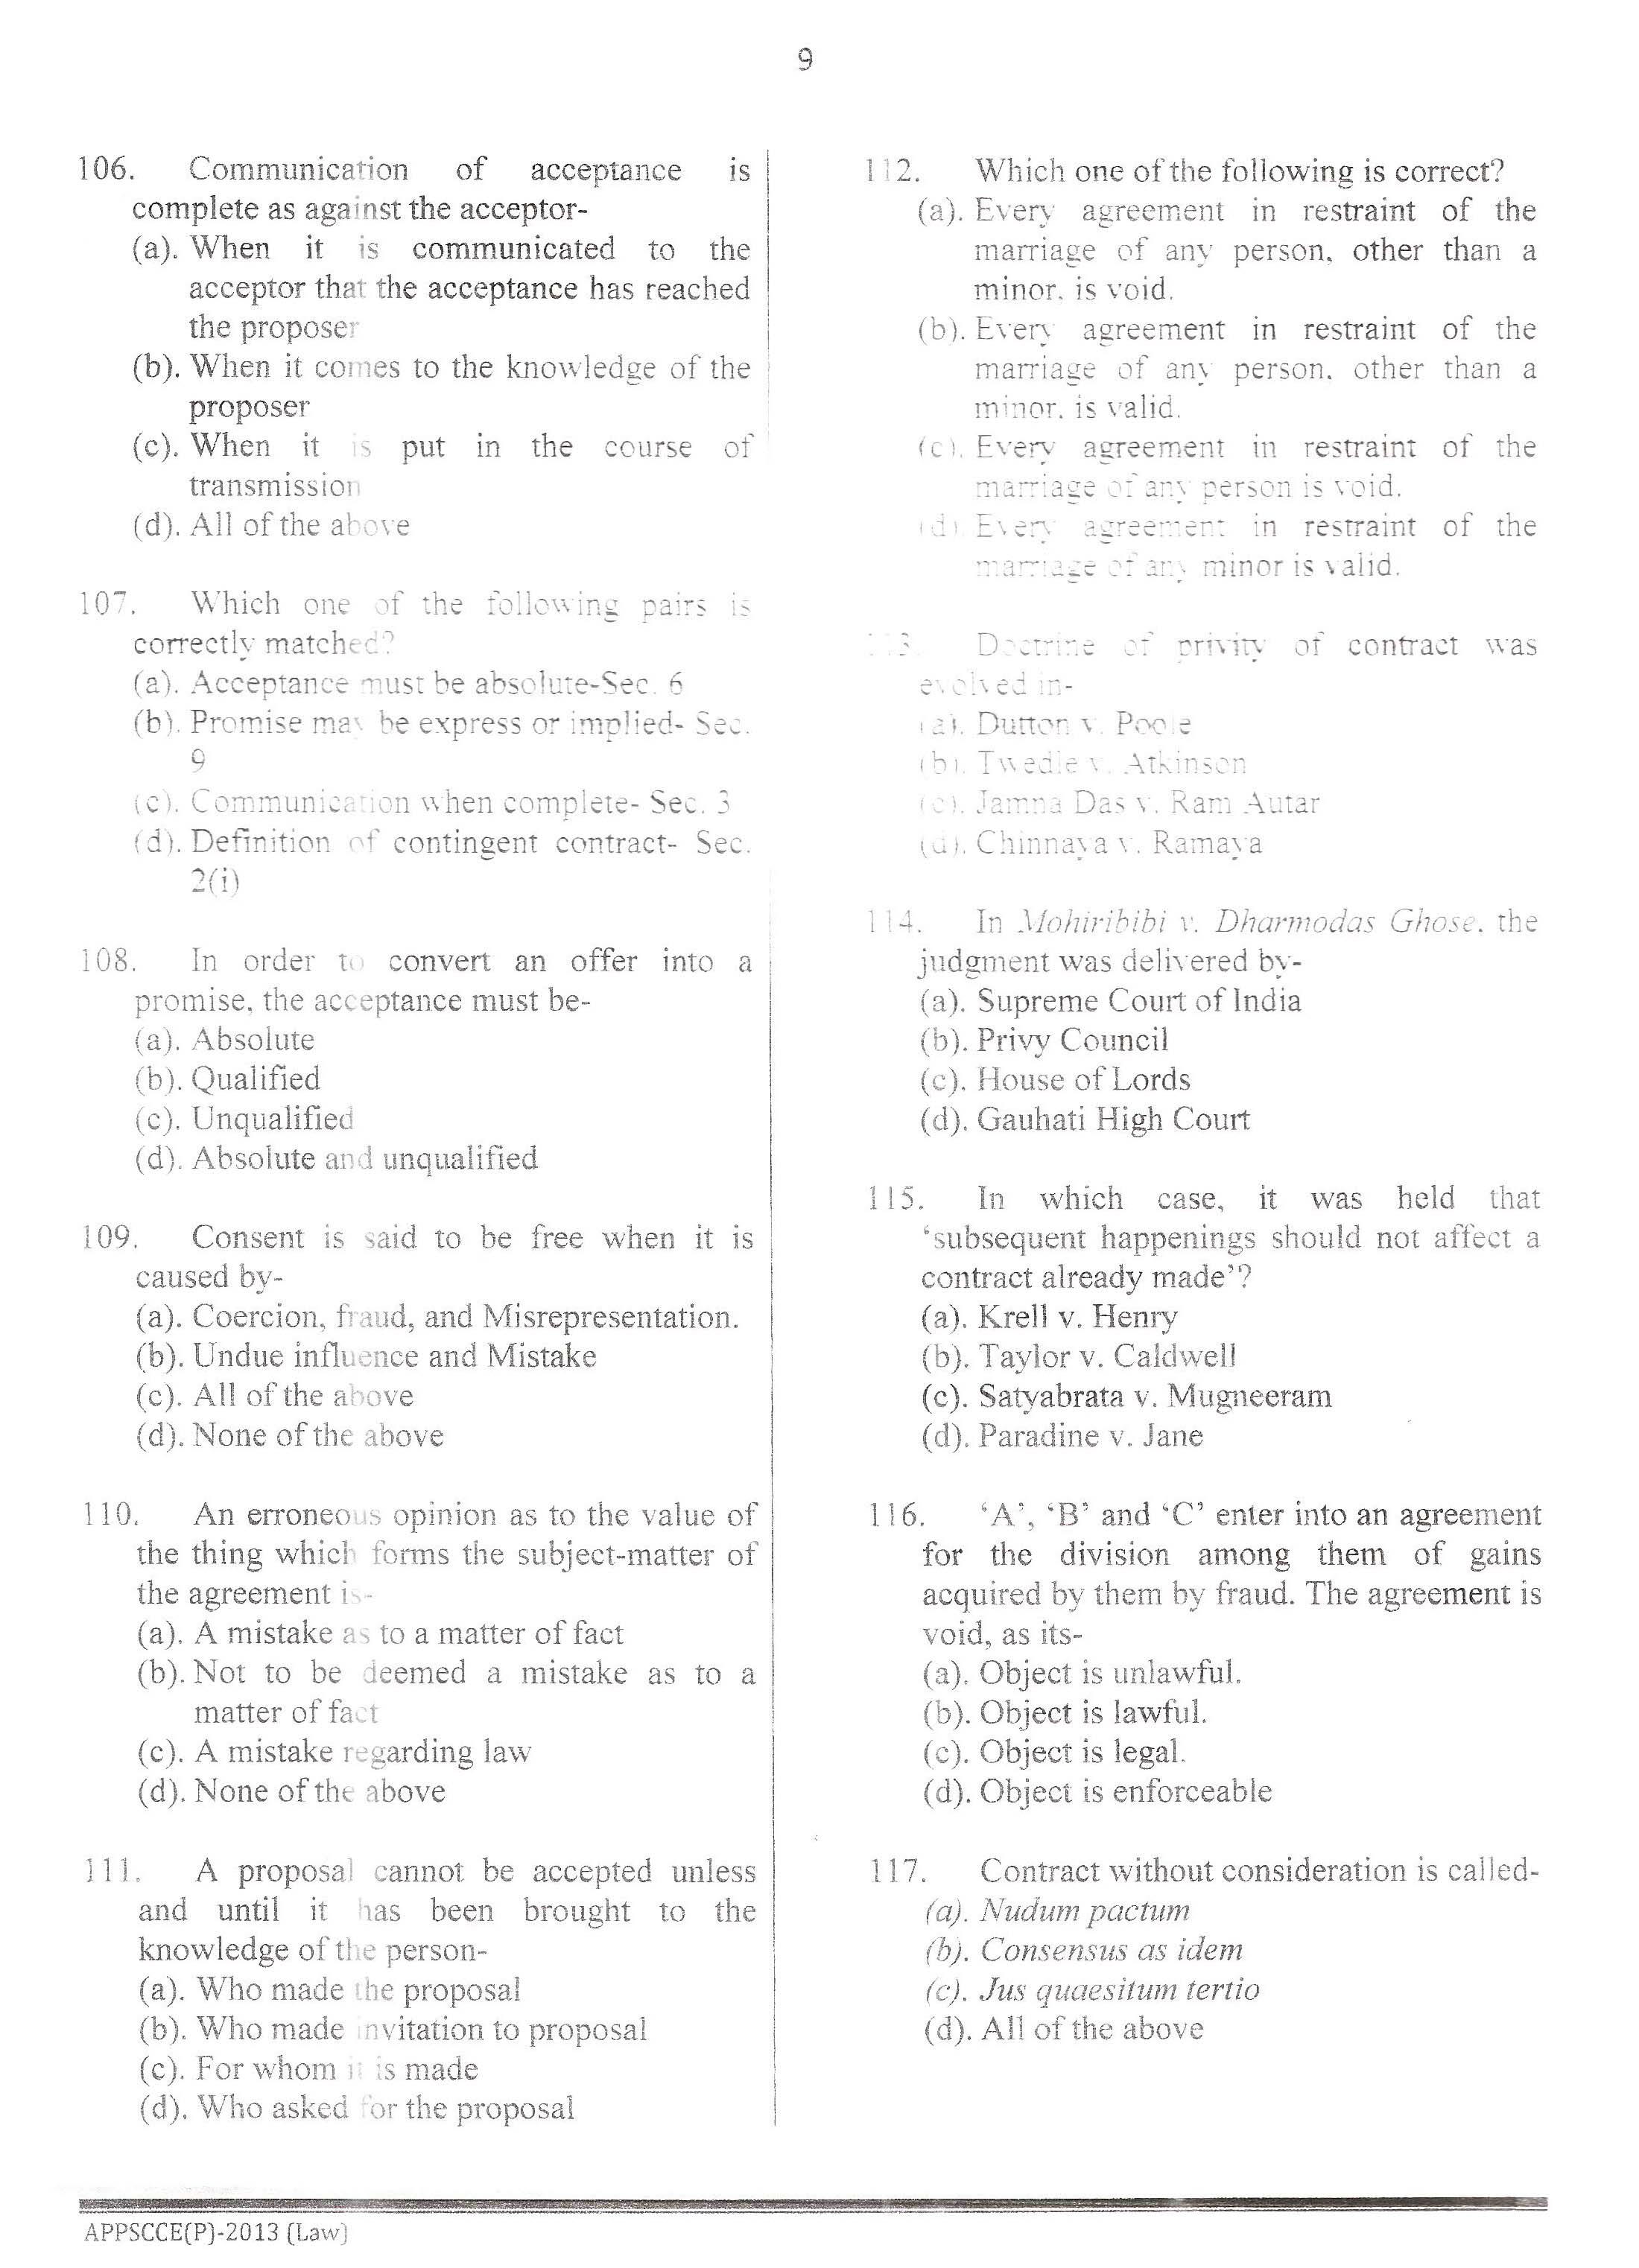 APPSC Combined Competitive Prelims Exam 2013 Law 10